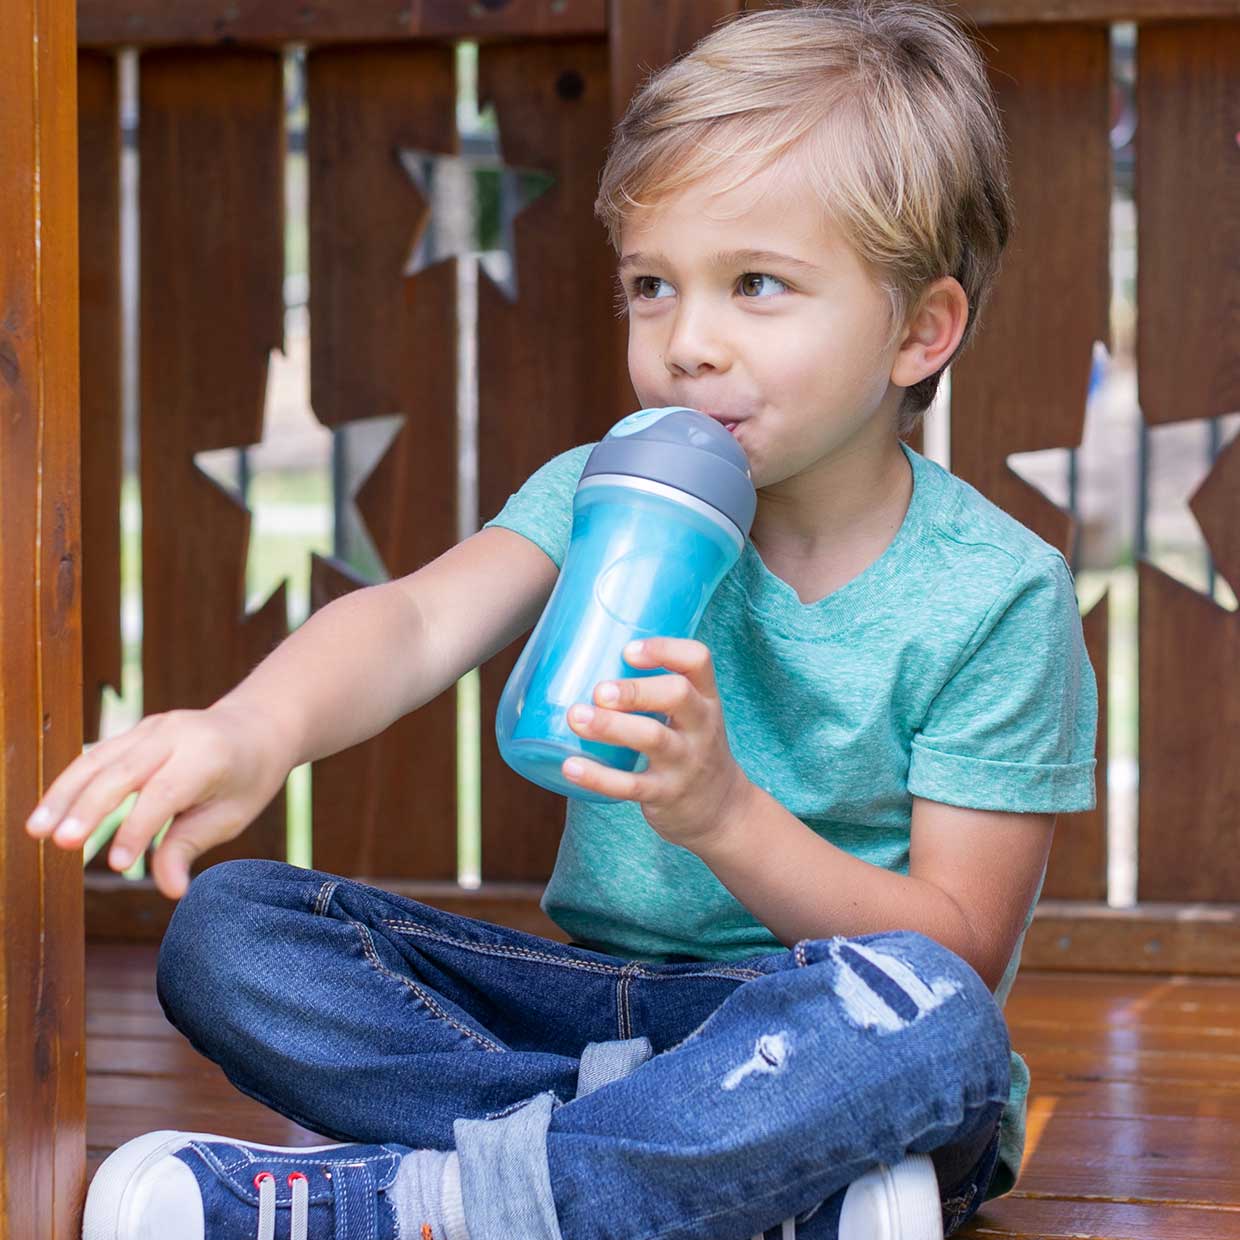 https://www.chiccousa.com/on/demandware.static/-/Sites-Chicco-Library/default/dw8c3ffcc1/images/baby-talk/when-and-how-to-introduce-a-sippy-cup-2.jpg